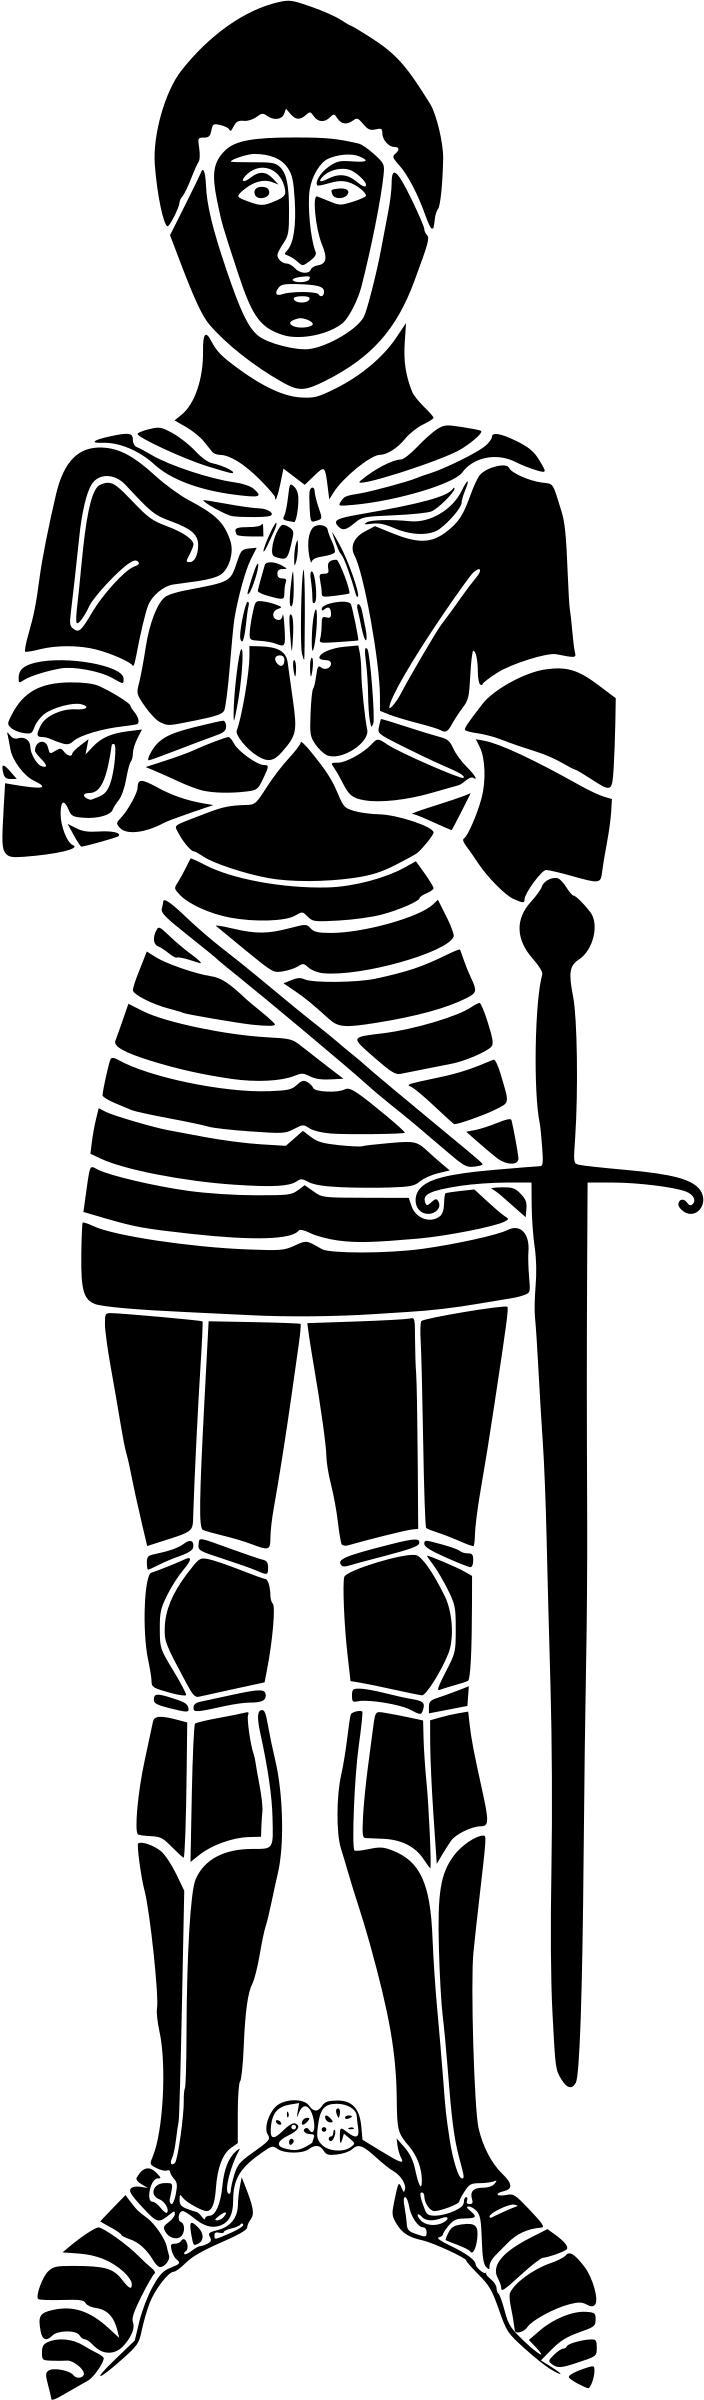 Knight silhouette png transparent